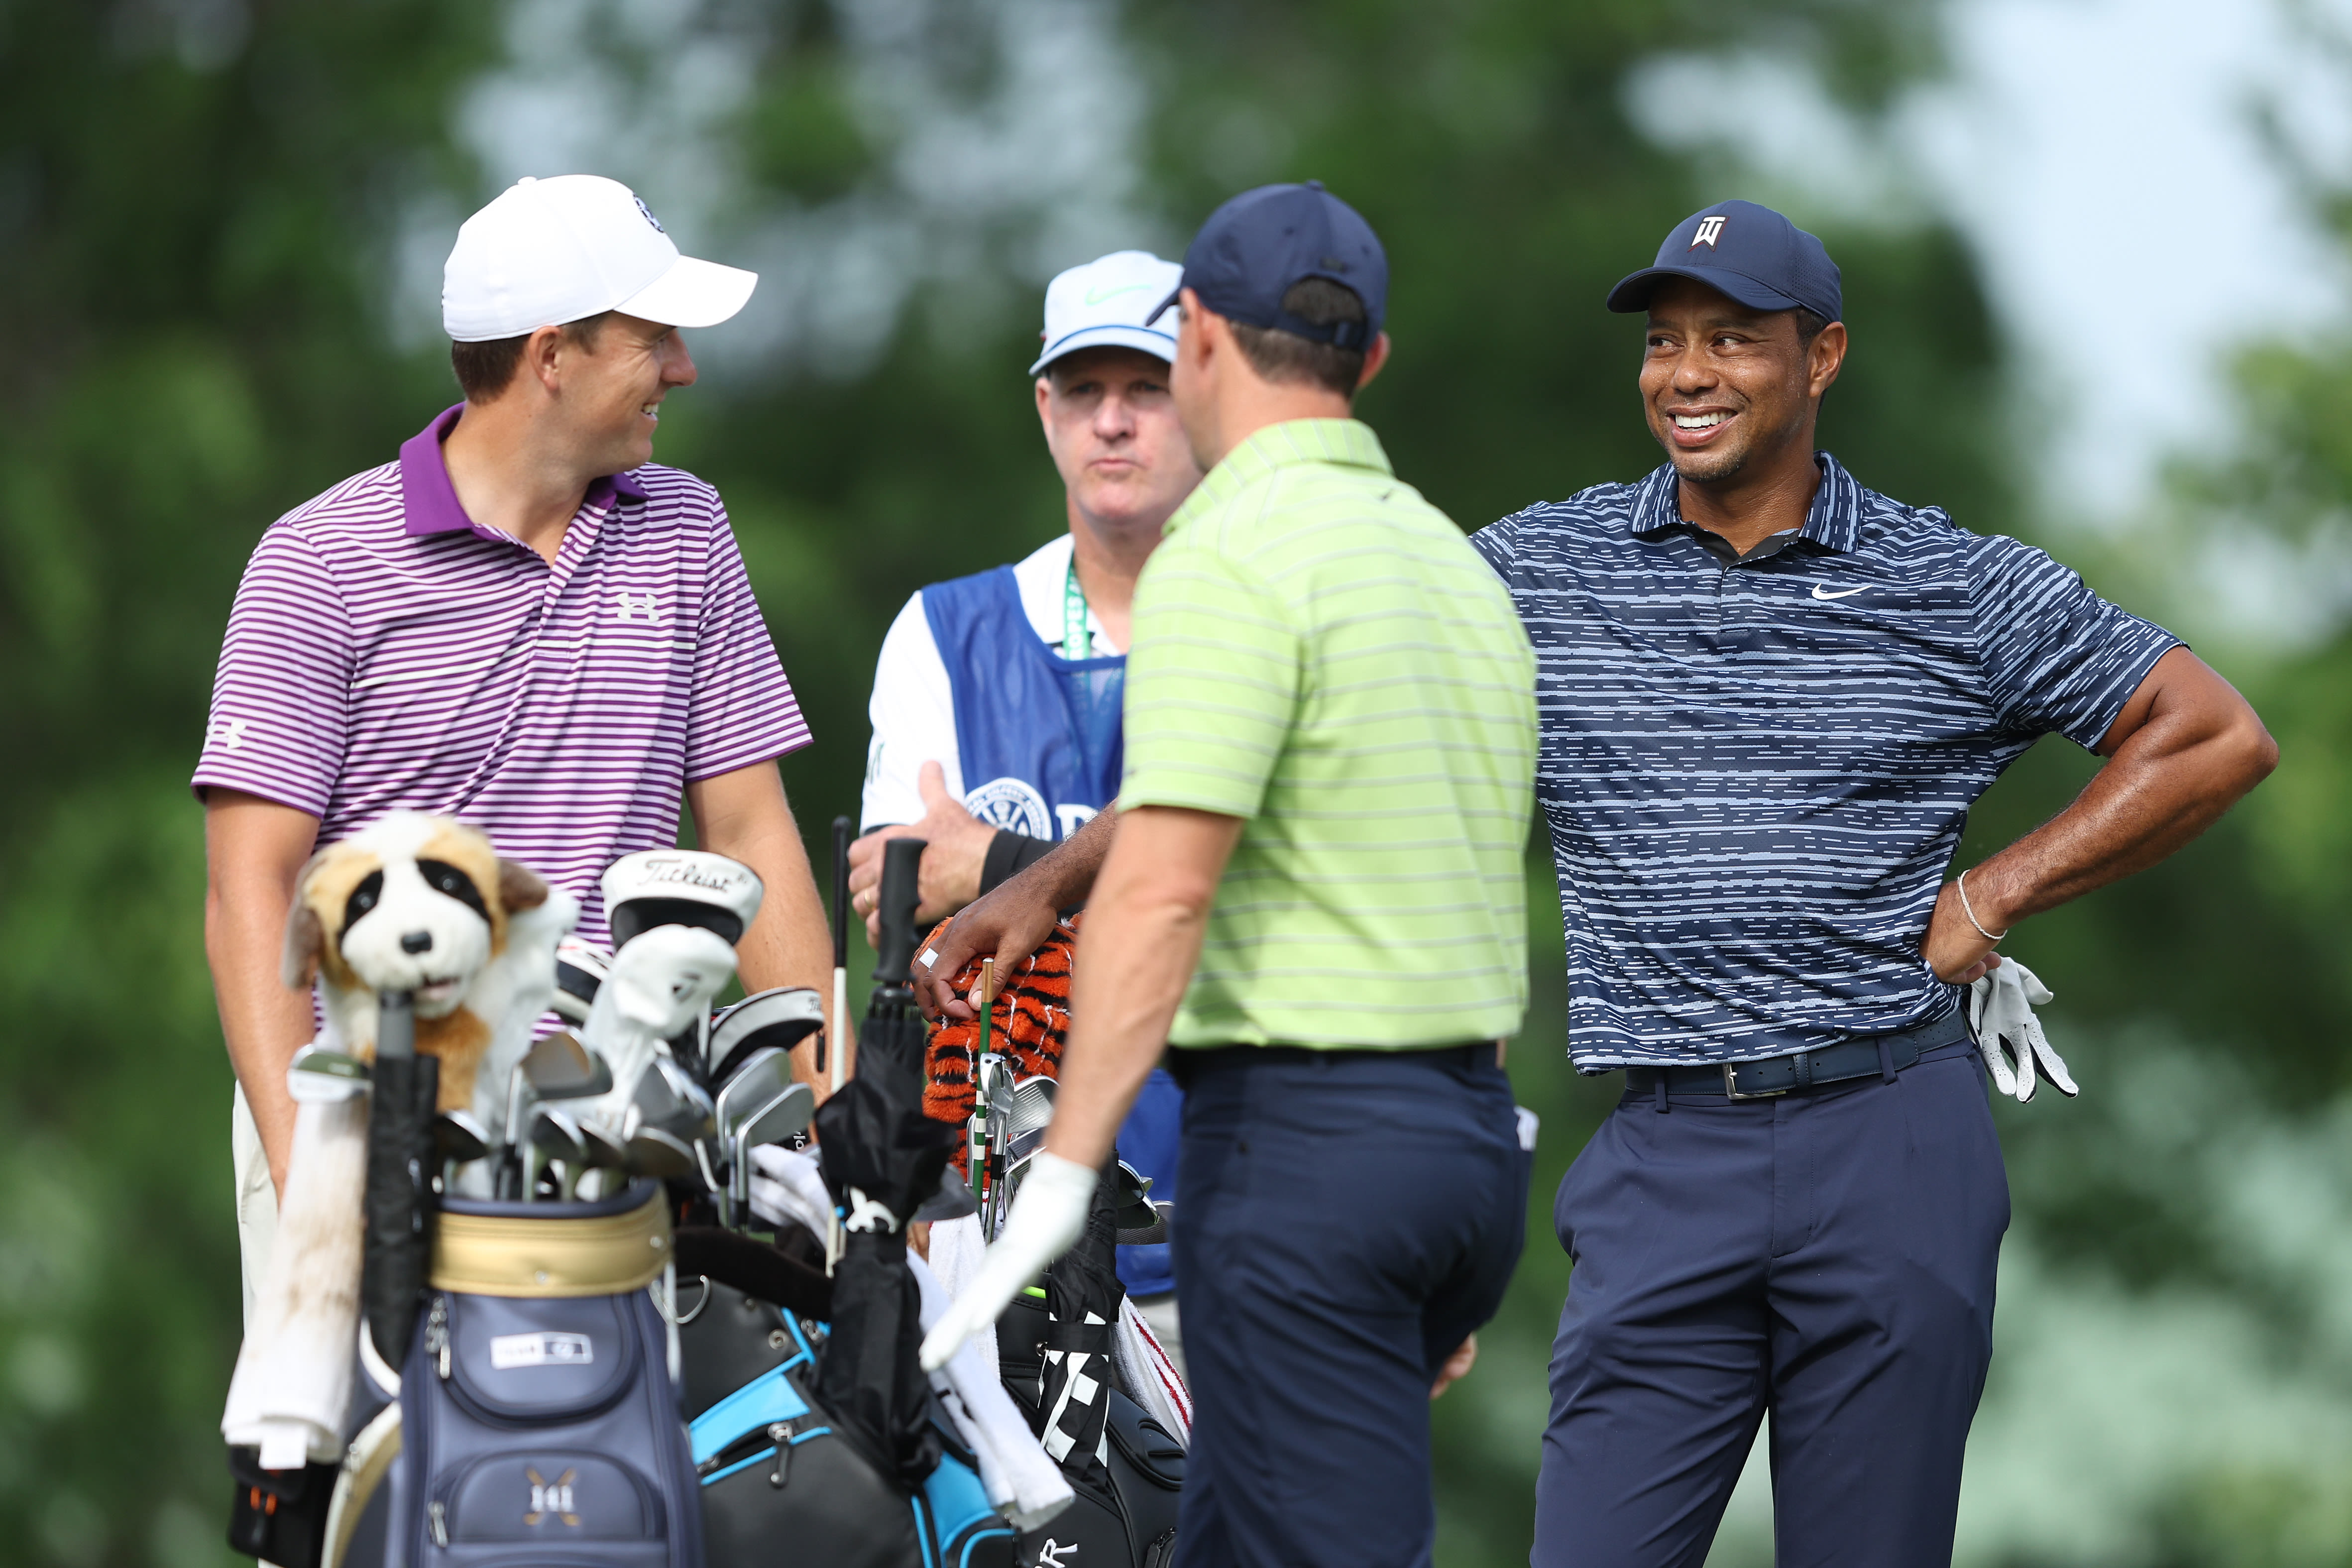 Tiger Woods, Rory McIlroy, and Jordan Spieth, prepare to tee off on the 14th tee during the first round of the 2022 PGA Championship at Southern Hills Country Club on May 19, 2022 in Tulsa, Oklahoma.